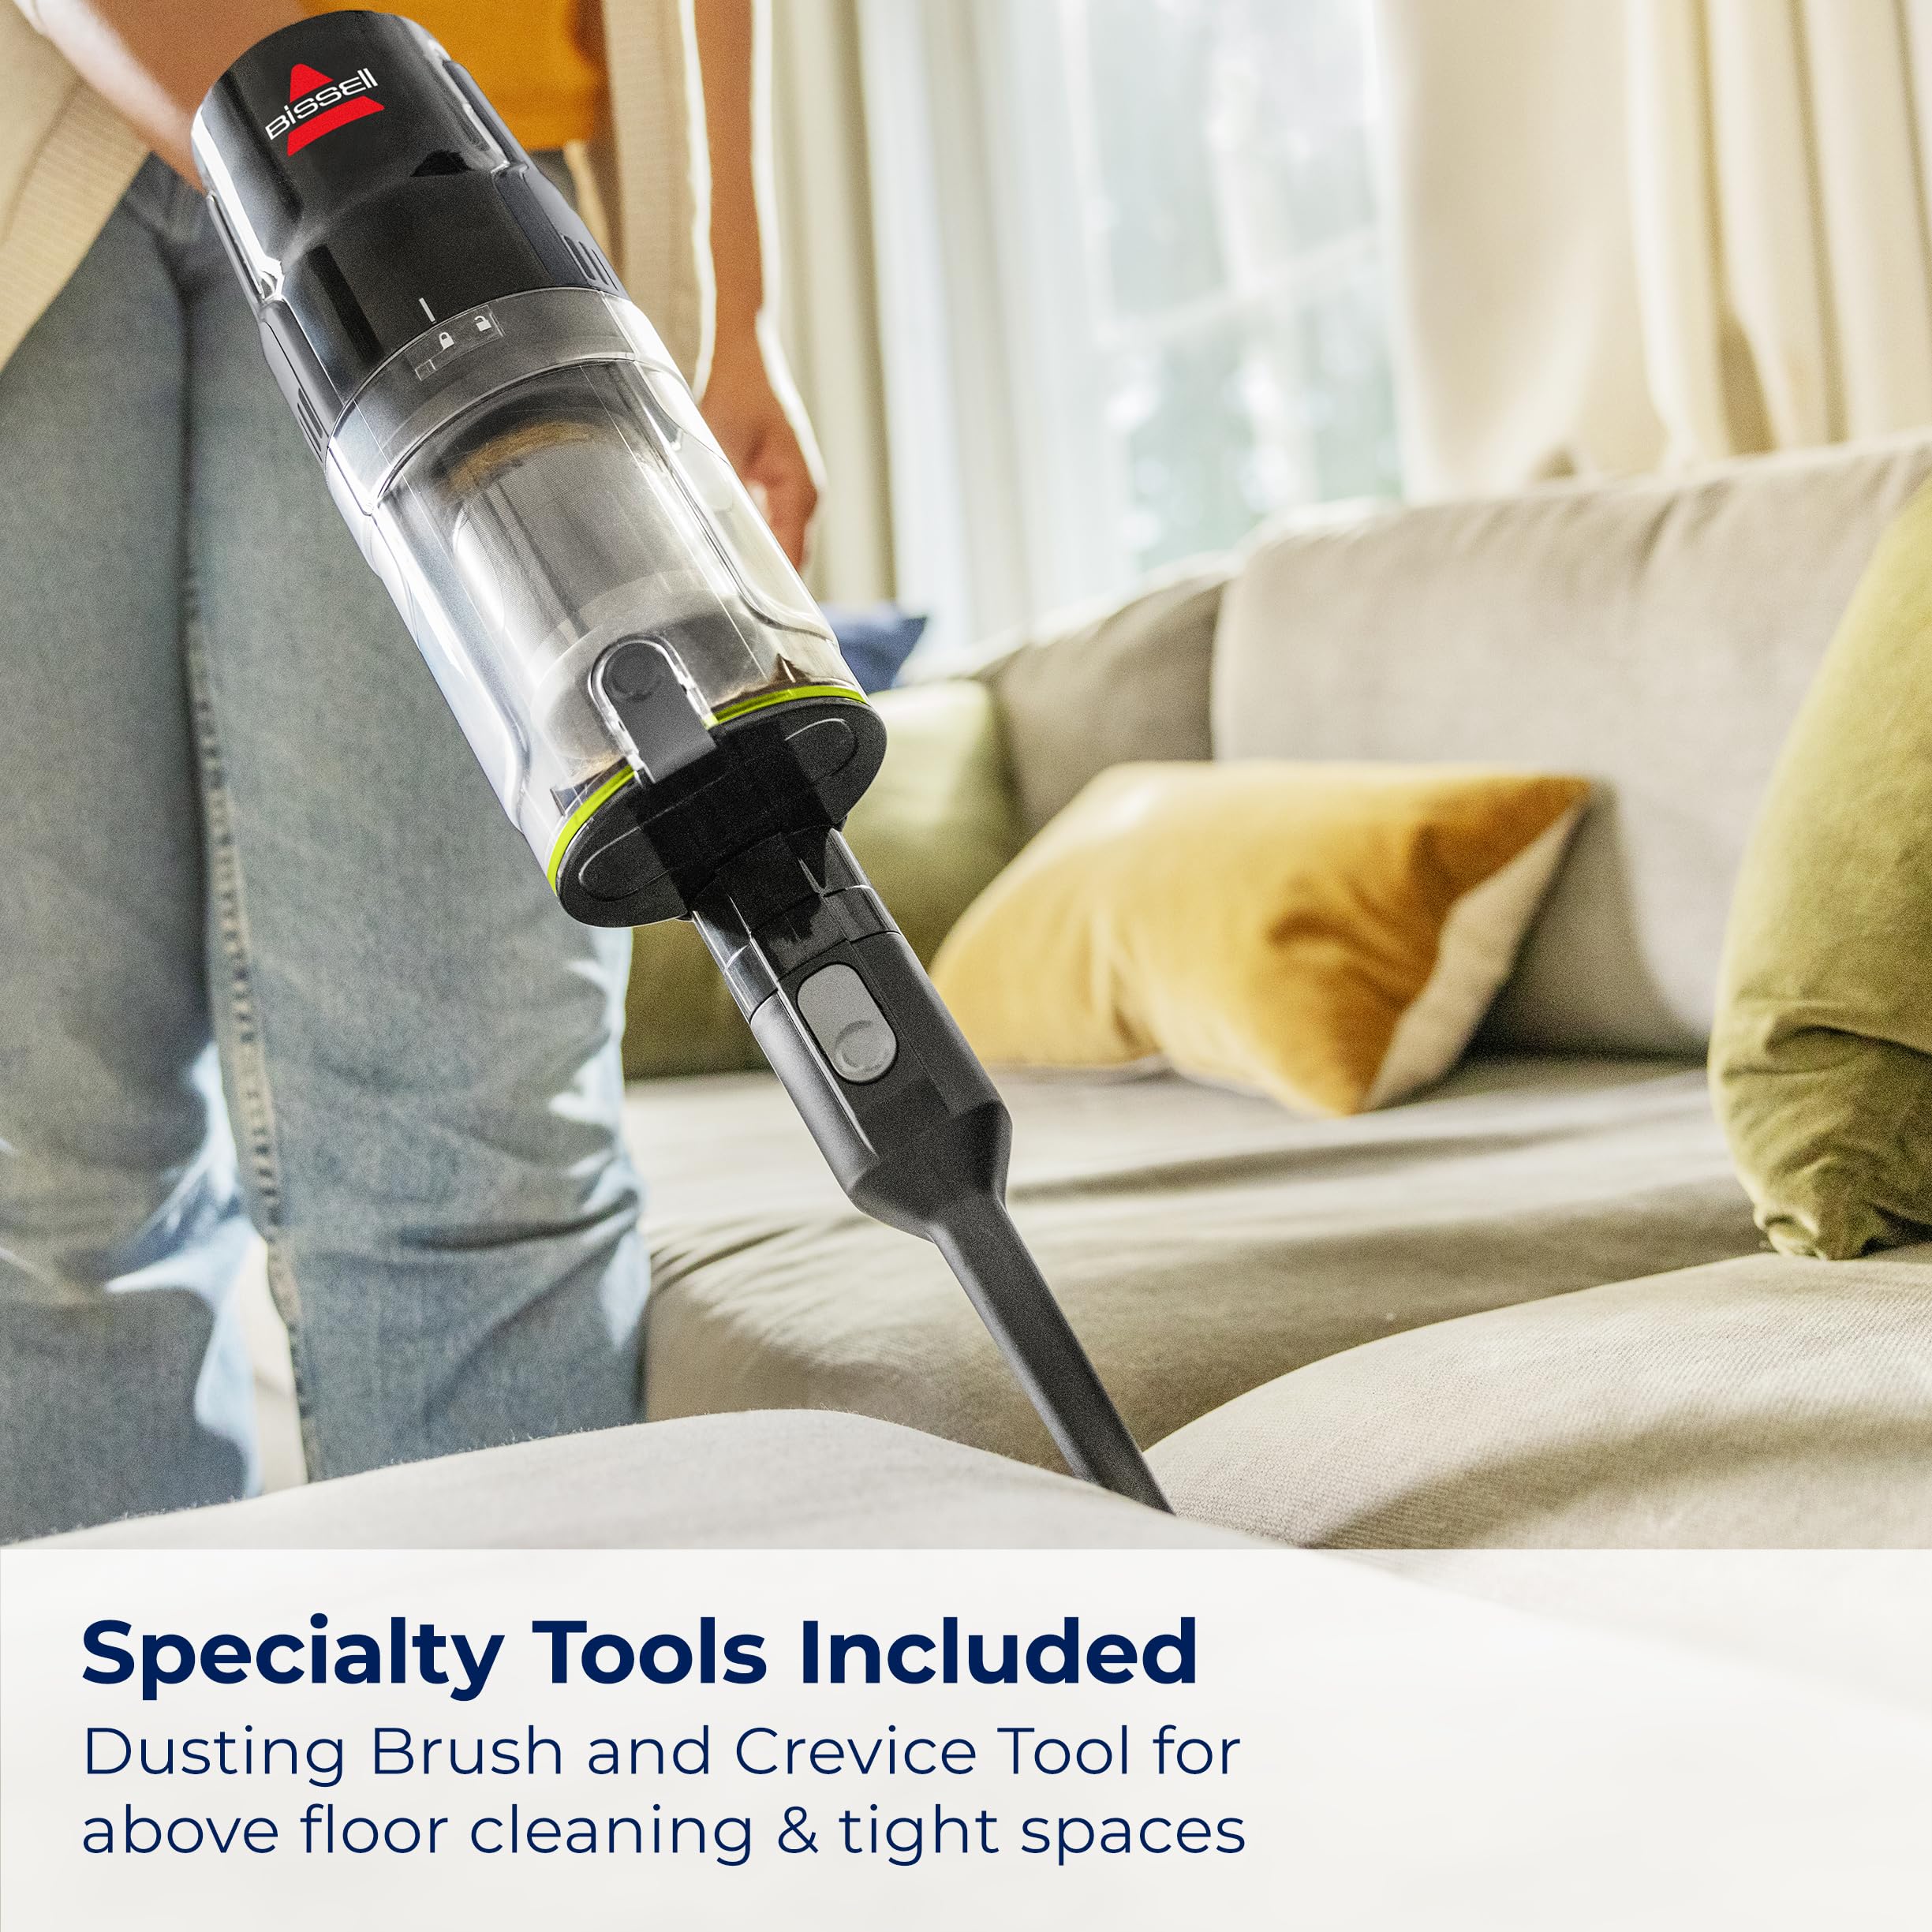 BISSELL CleanView XR Pet 300w Lightweight Cordless Vacuum w/ Removable Battery, 40-min runtime, Deep-Cleaning Furbrush & Tangle-Free Brush Roll, LED lights, XL Tank, Dusting & Crevice Tool, Wall Mount